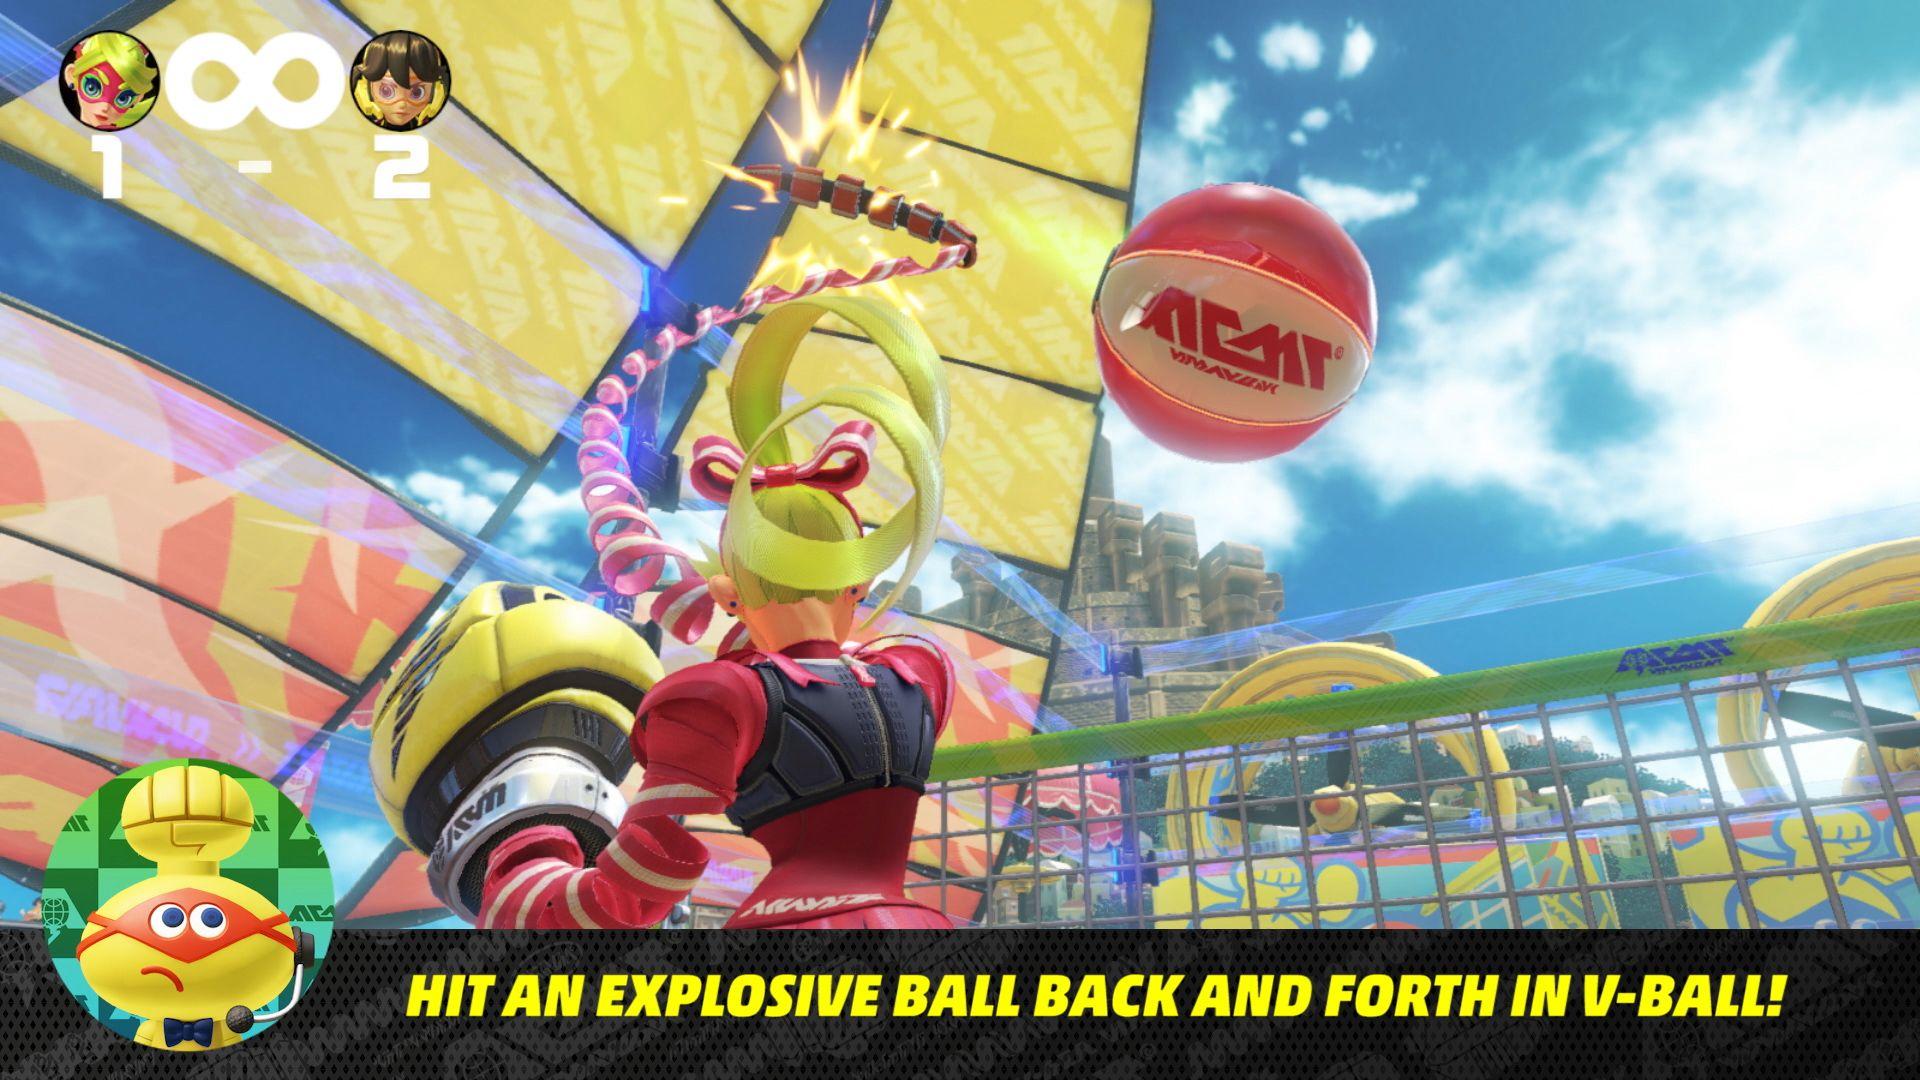 Arms will get new content for free after launch